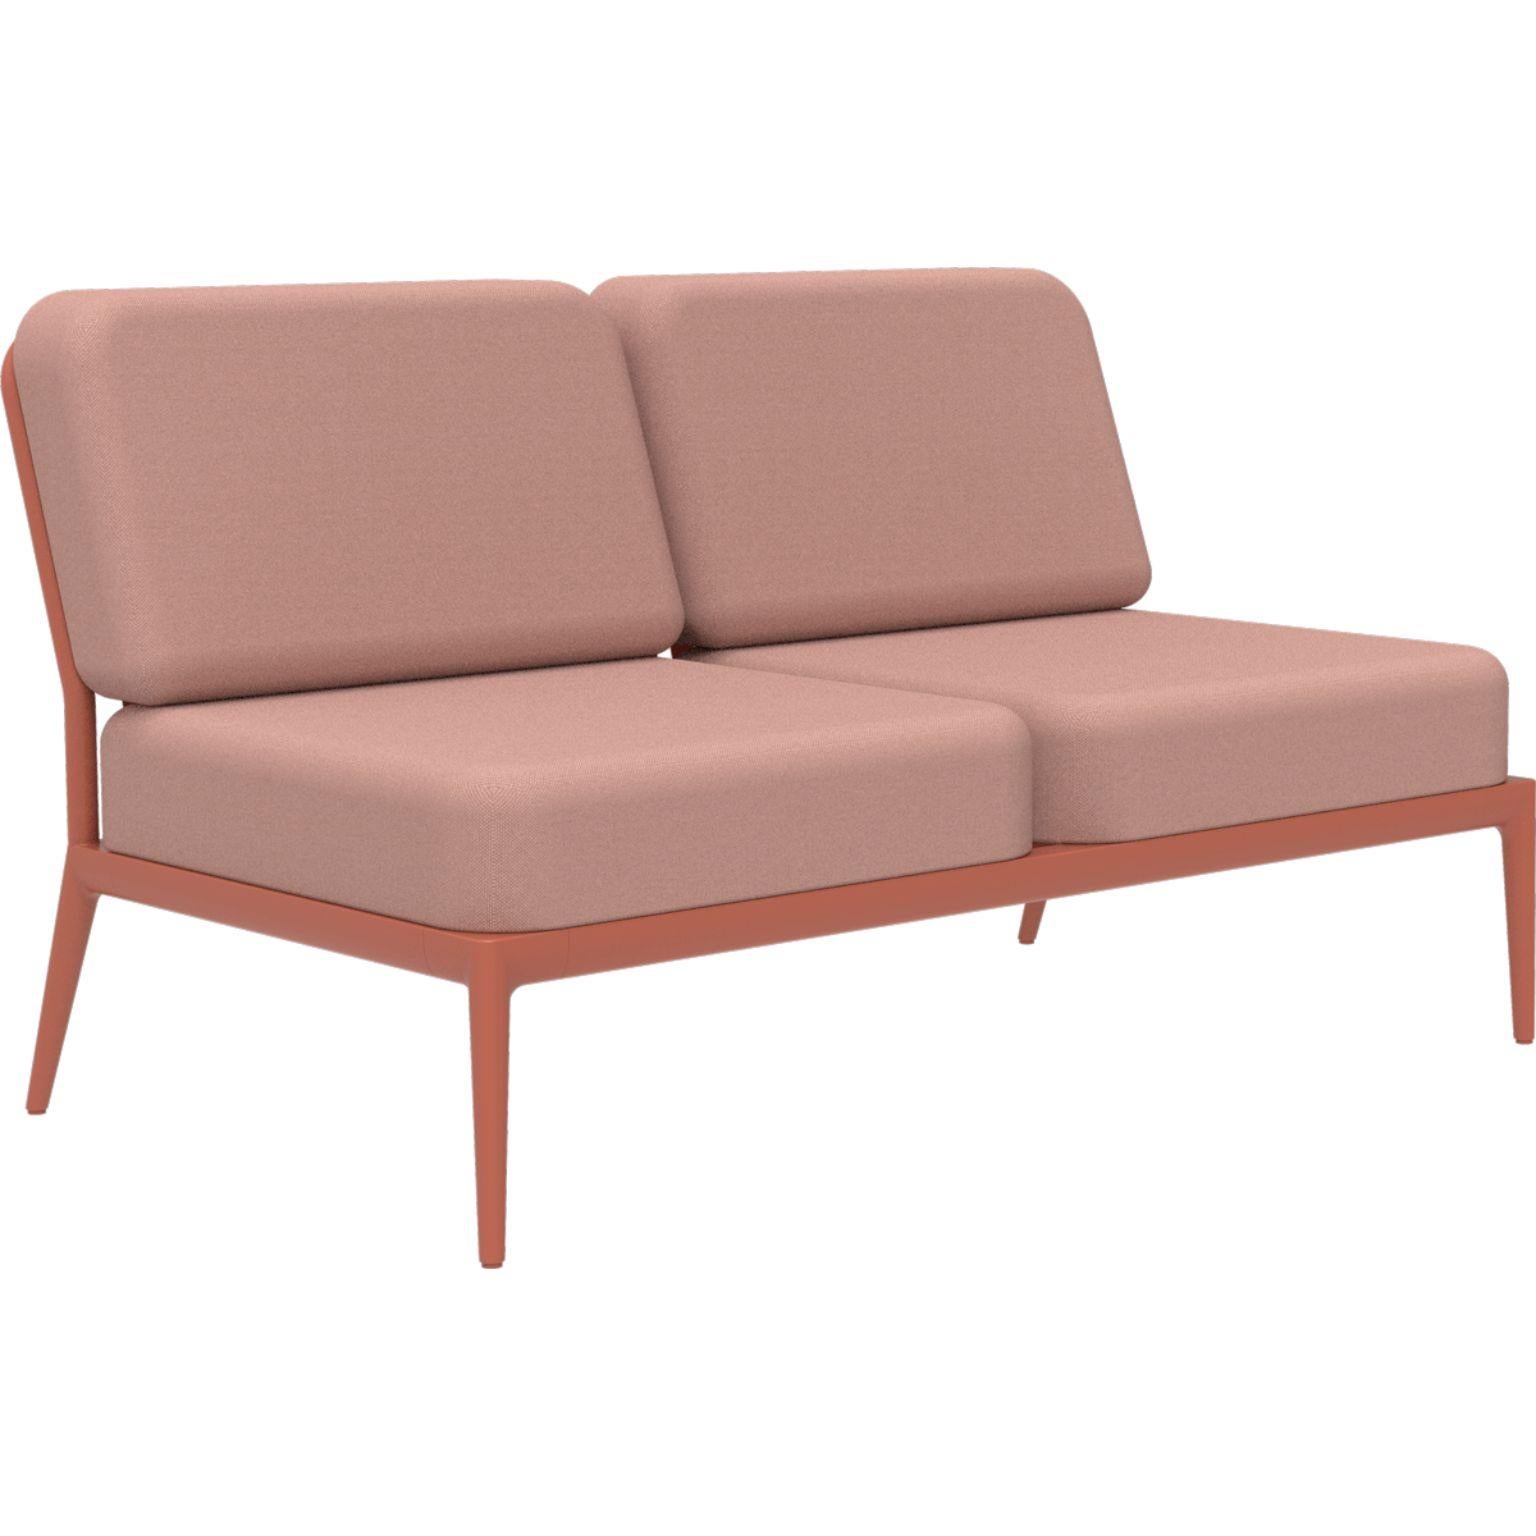 Ribbons Salmon double central modular sofa by Mowee.
Dimensions: D83 x W136 x H81 cm.
Material: Aluminium, and upholstery.
Weight: 27 kg.
Also available in different colors and finishes. 

An unmistakable collection for its beauty and